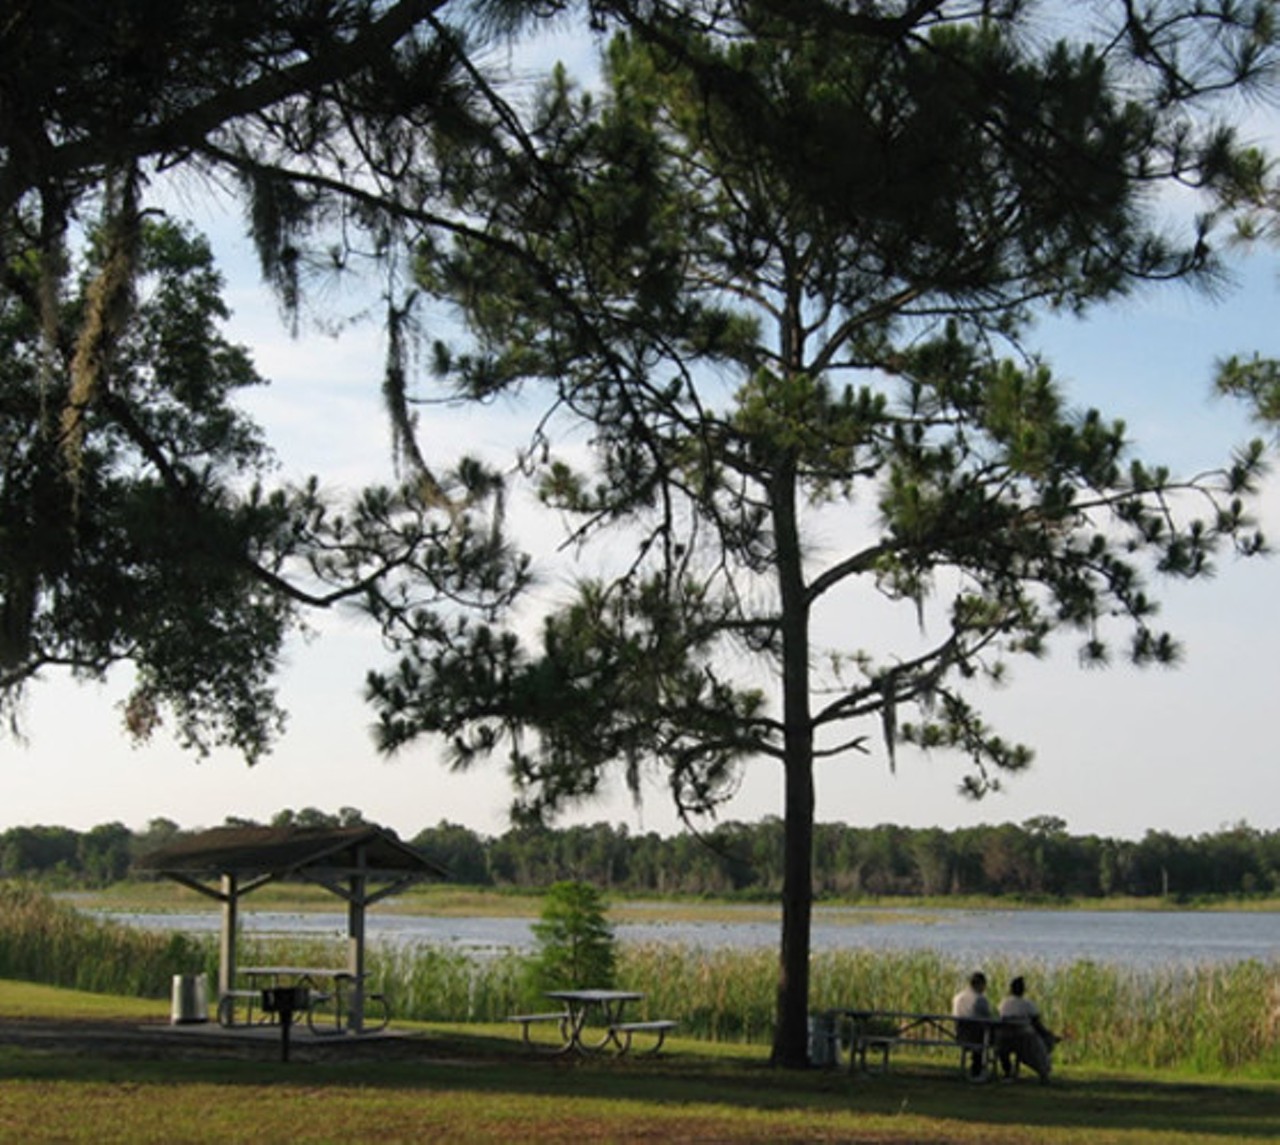 Lake Conservation Park 
17302 N Dale Mabry Highway, Lutz
There are five lakes at this park, as well as cypress swamps, pine flatwoods and hardwood hammocks. The park&#146;s trail is 3.2-miles long. Lake Conservation Park is open from 8 a.m. to 6 p.m. and admission costs $2 per vehicle.
Photo via VisitTampaBay.com/a>